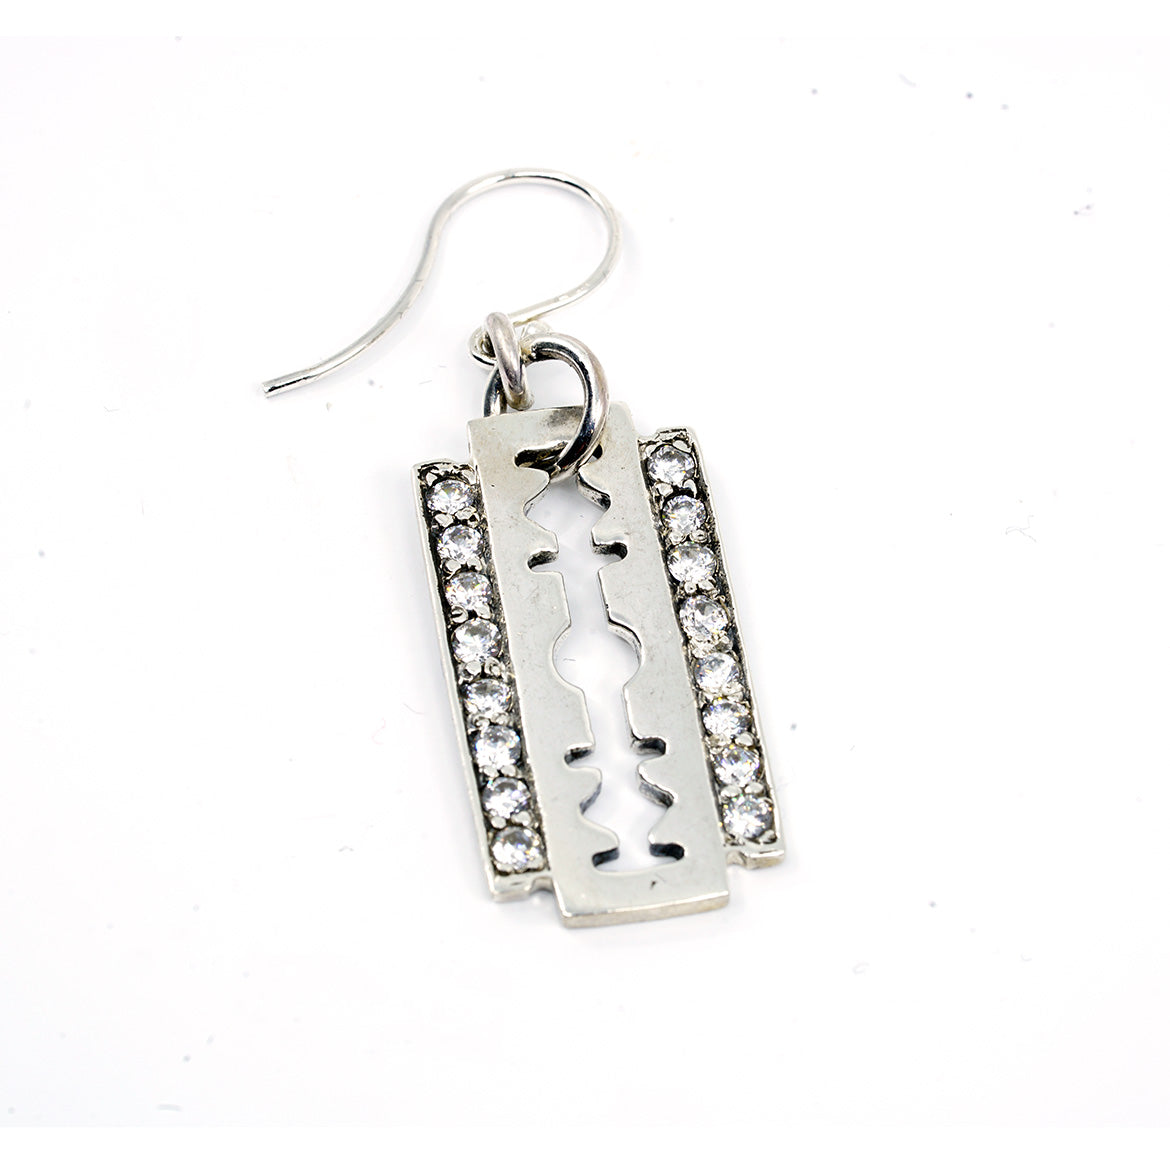 WILLIAM GRIFFITHS Sterling silver Razor blade earring